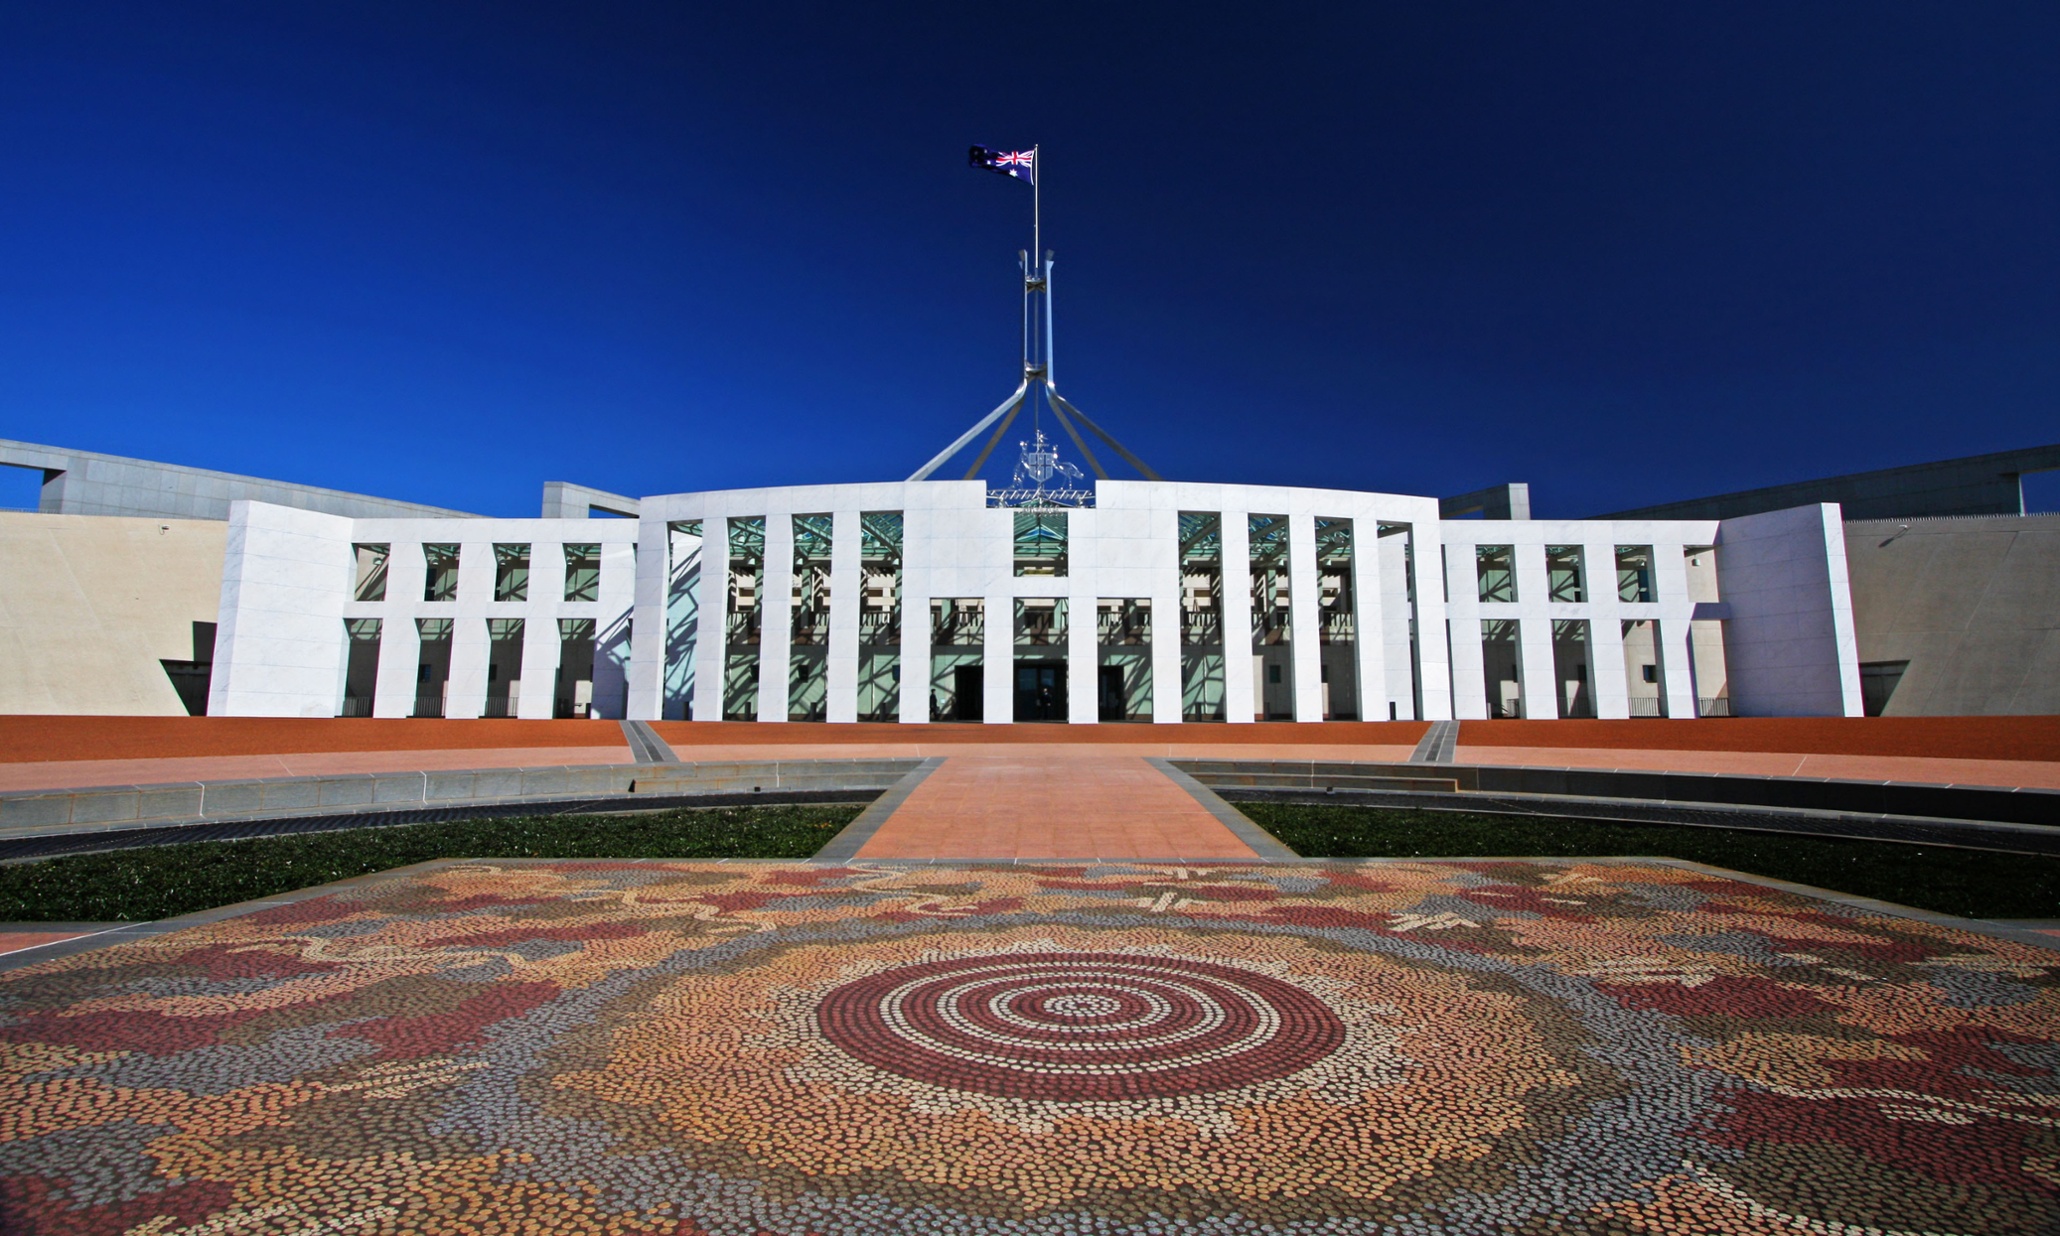 Canberra S Parliament House A Symbol Of National Identity A History Of Cities In 50